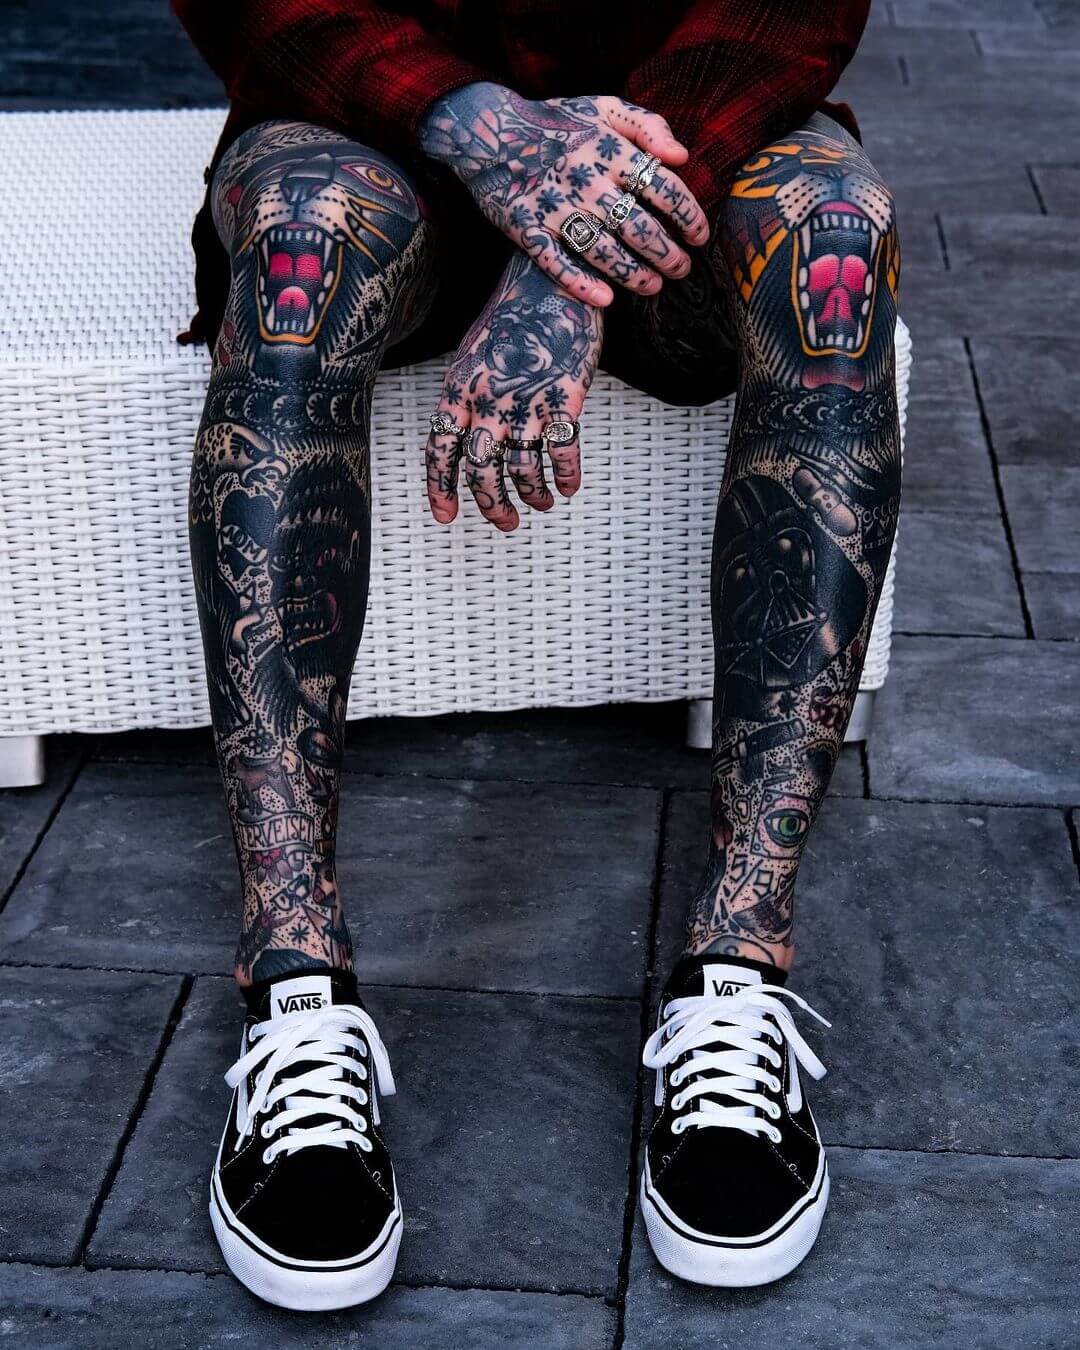 101 Best Leg Sleeves Tattoo Ideas That Will Blow Your Mind!